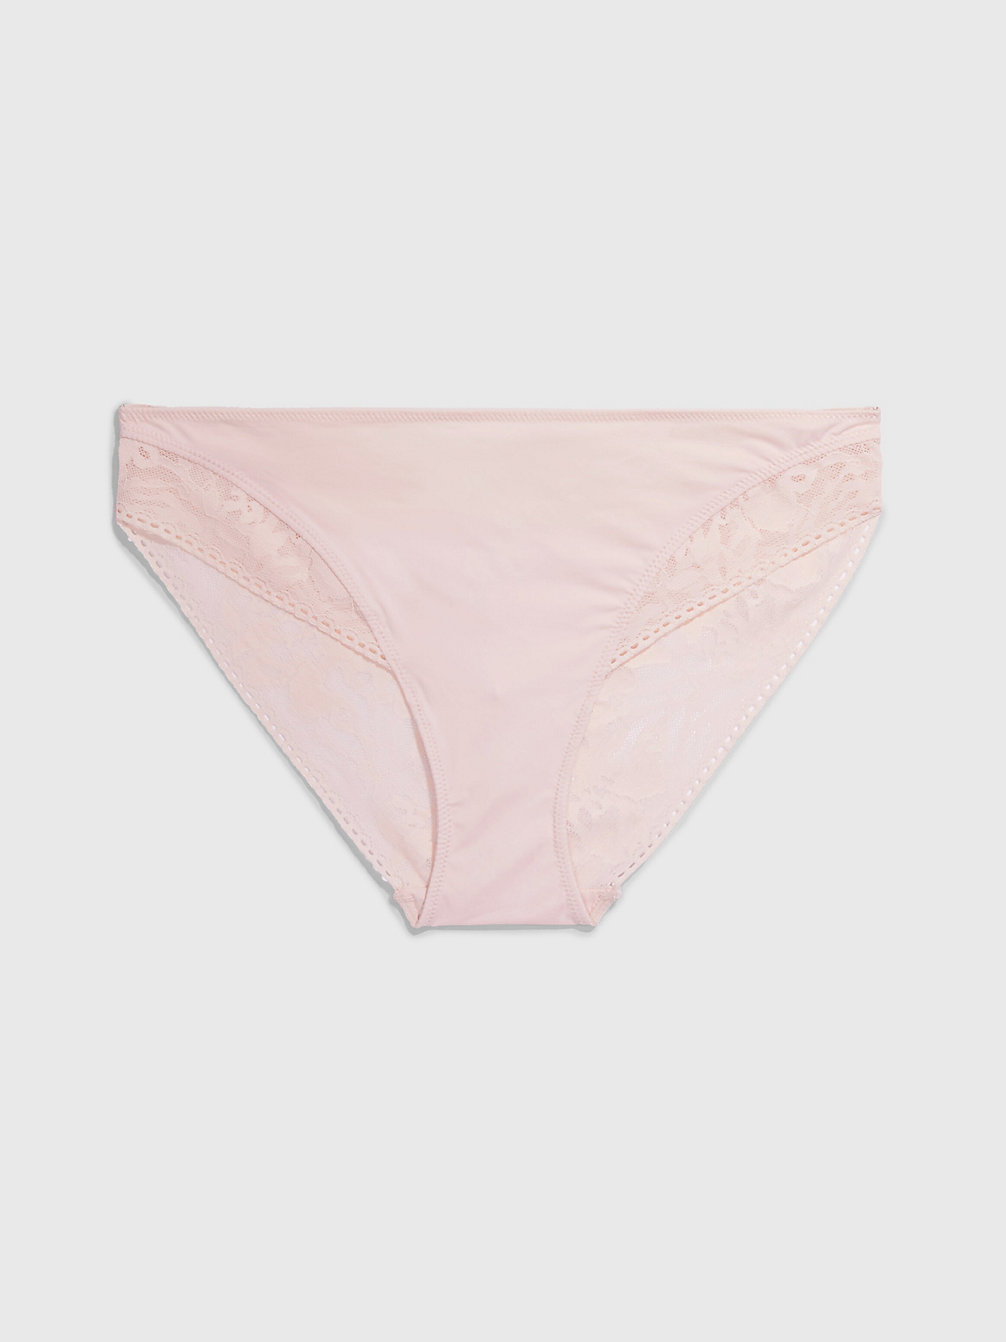 NYMPTHÂ€™S THIGH Culotte - Ultra Soft Lace undefined femmes Calvin Klein